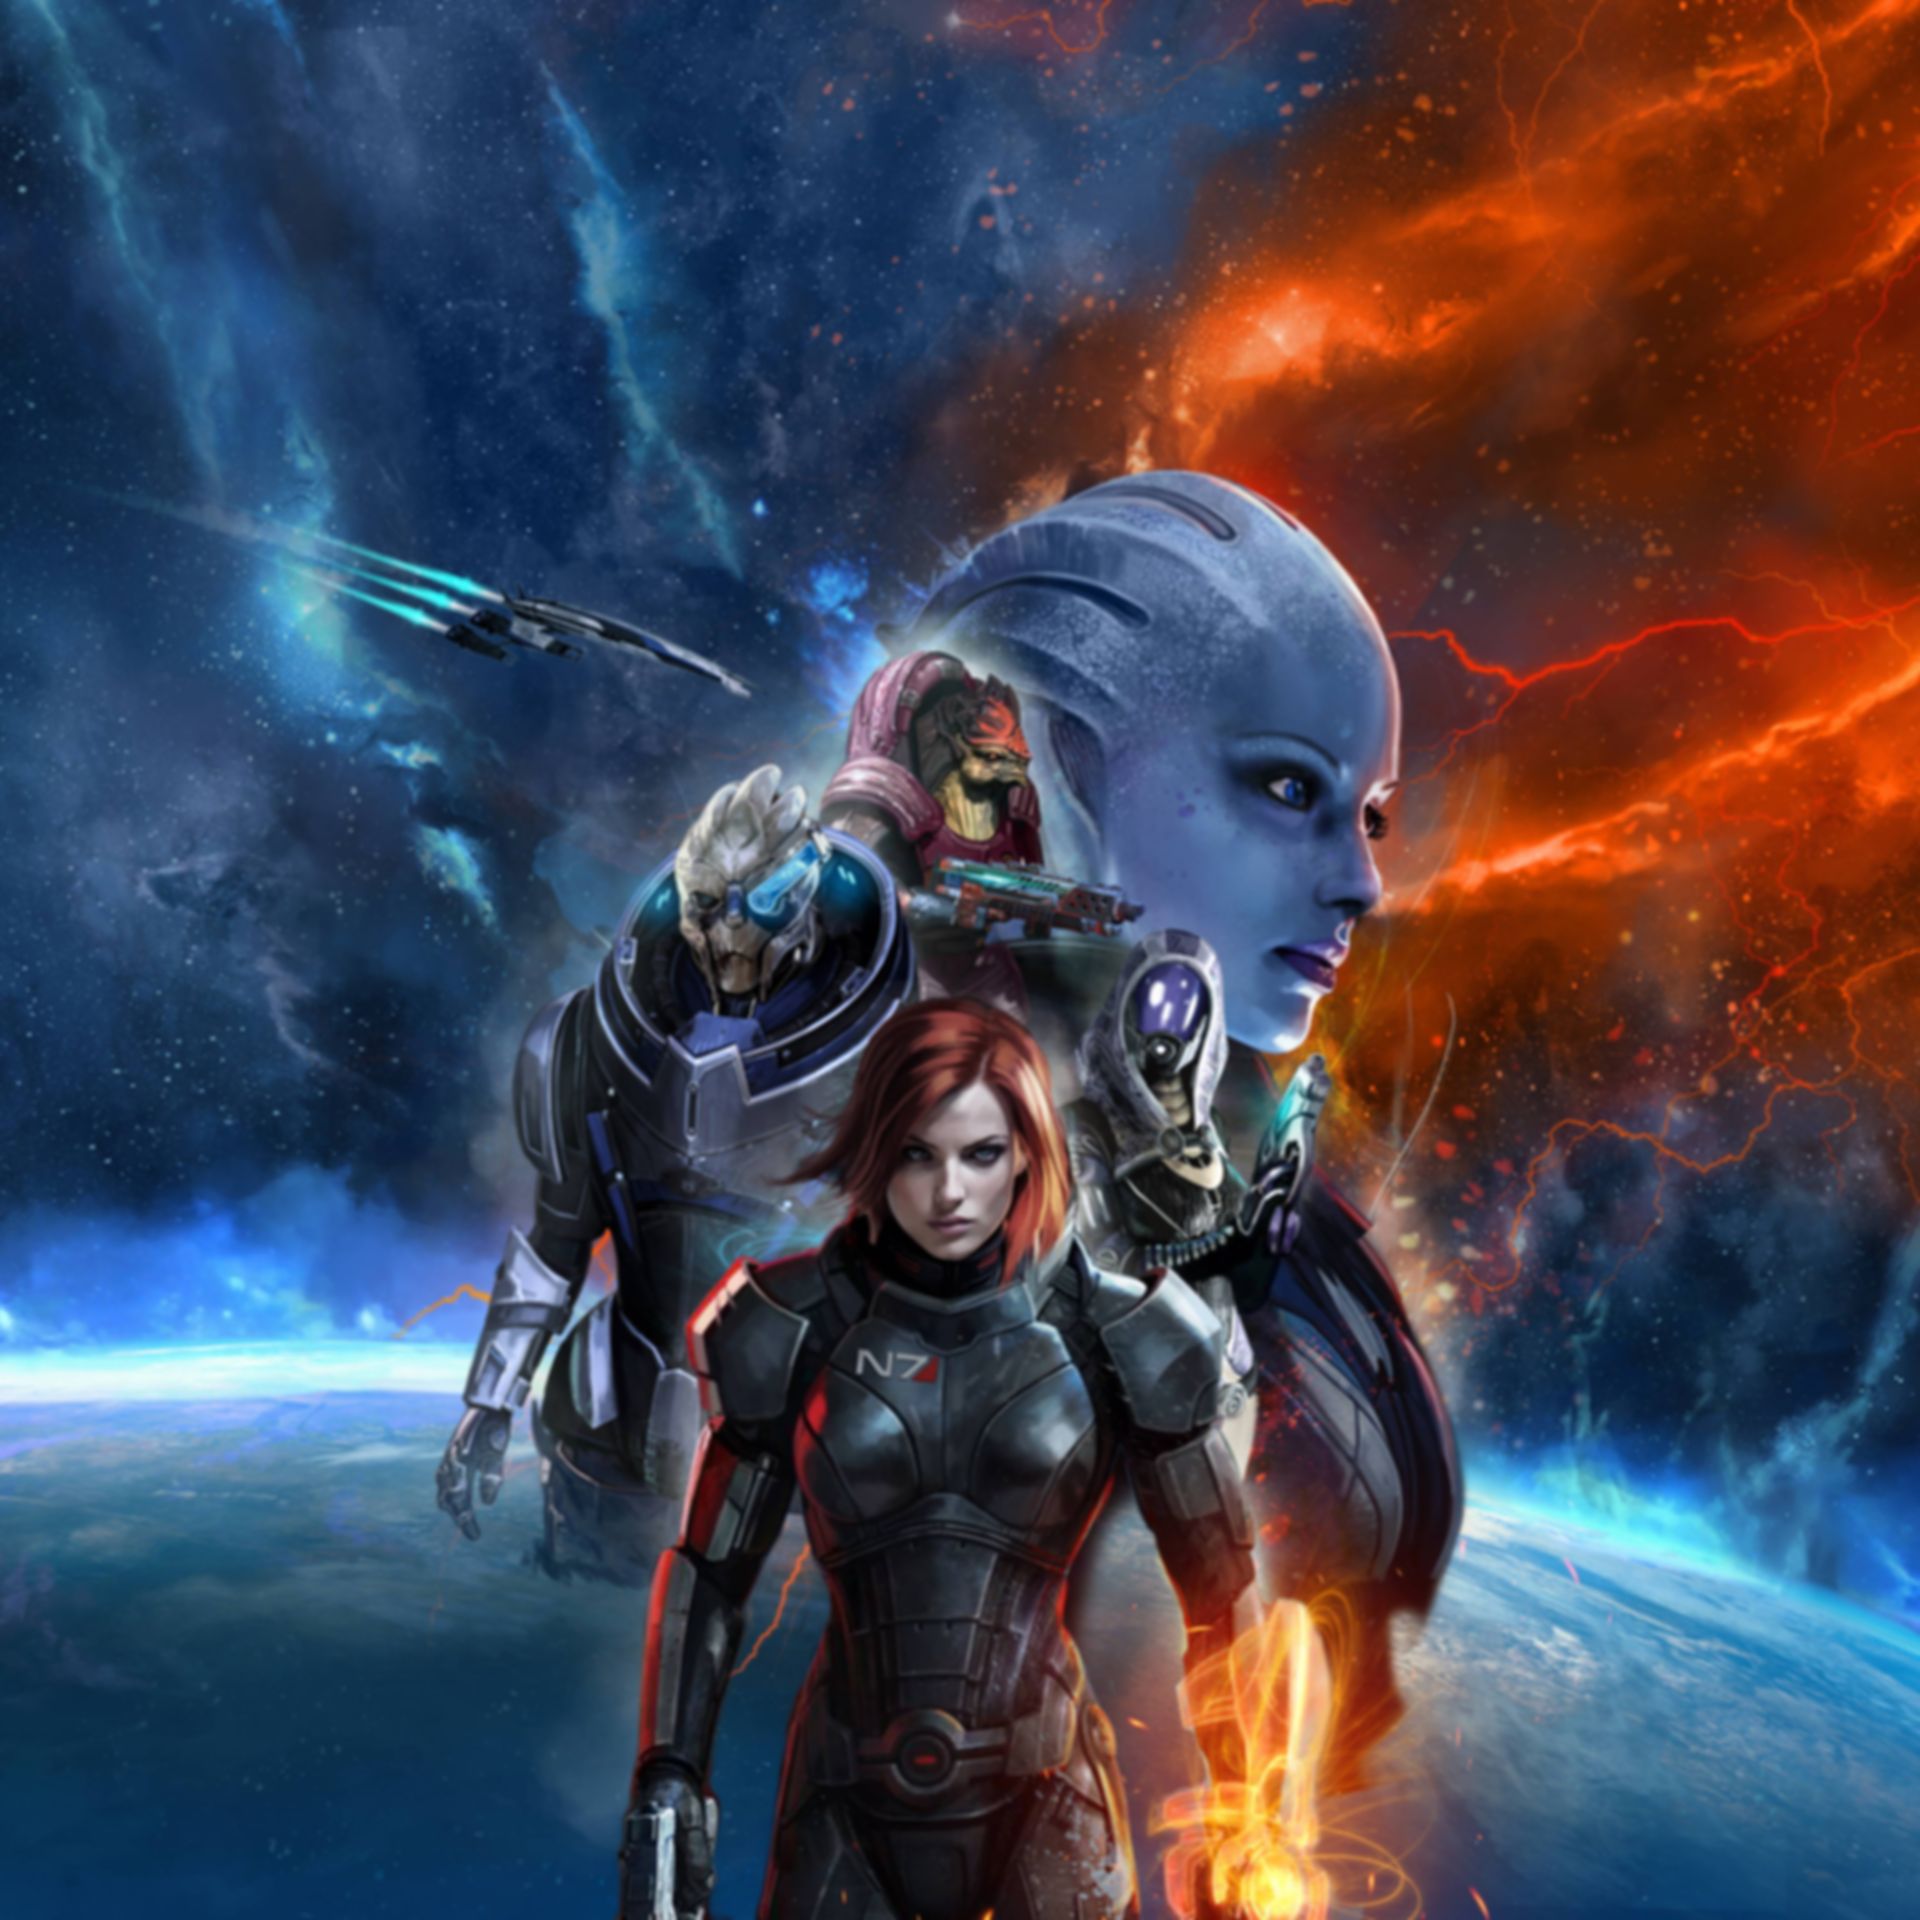 Mass Effect: The Board Game - Priority: Hagalaz by Modiphius Entertainment Set to Hit Tabletops in 2024